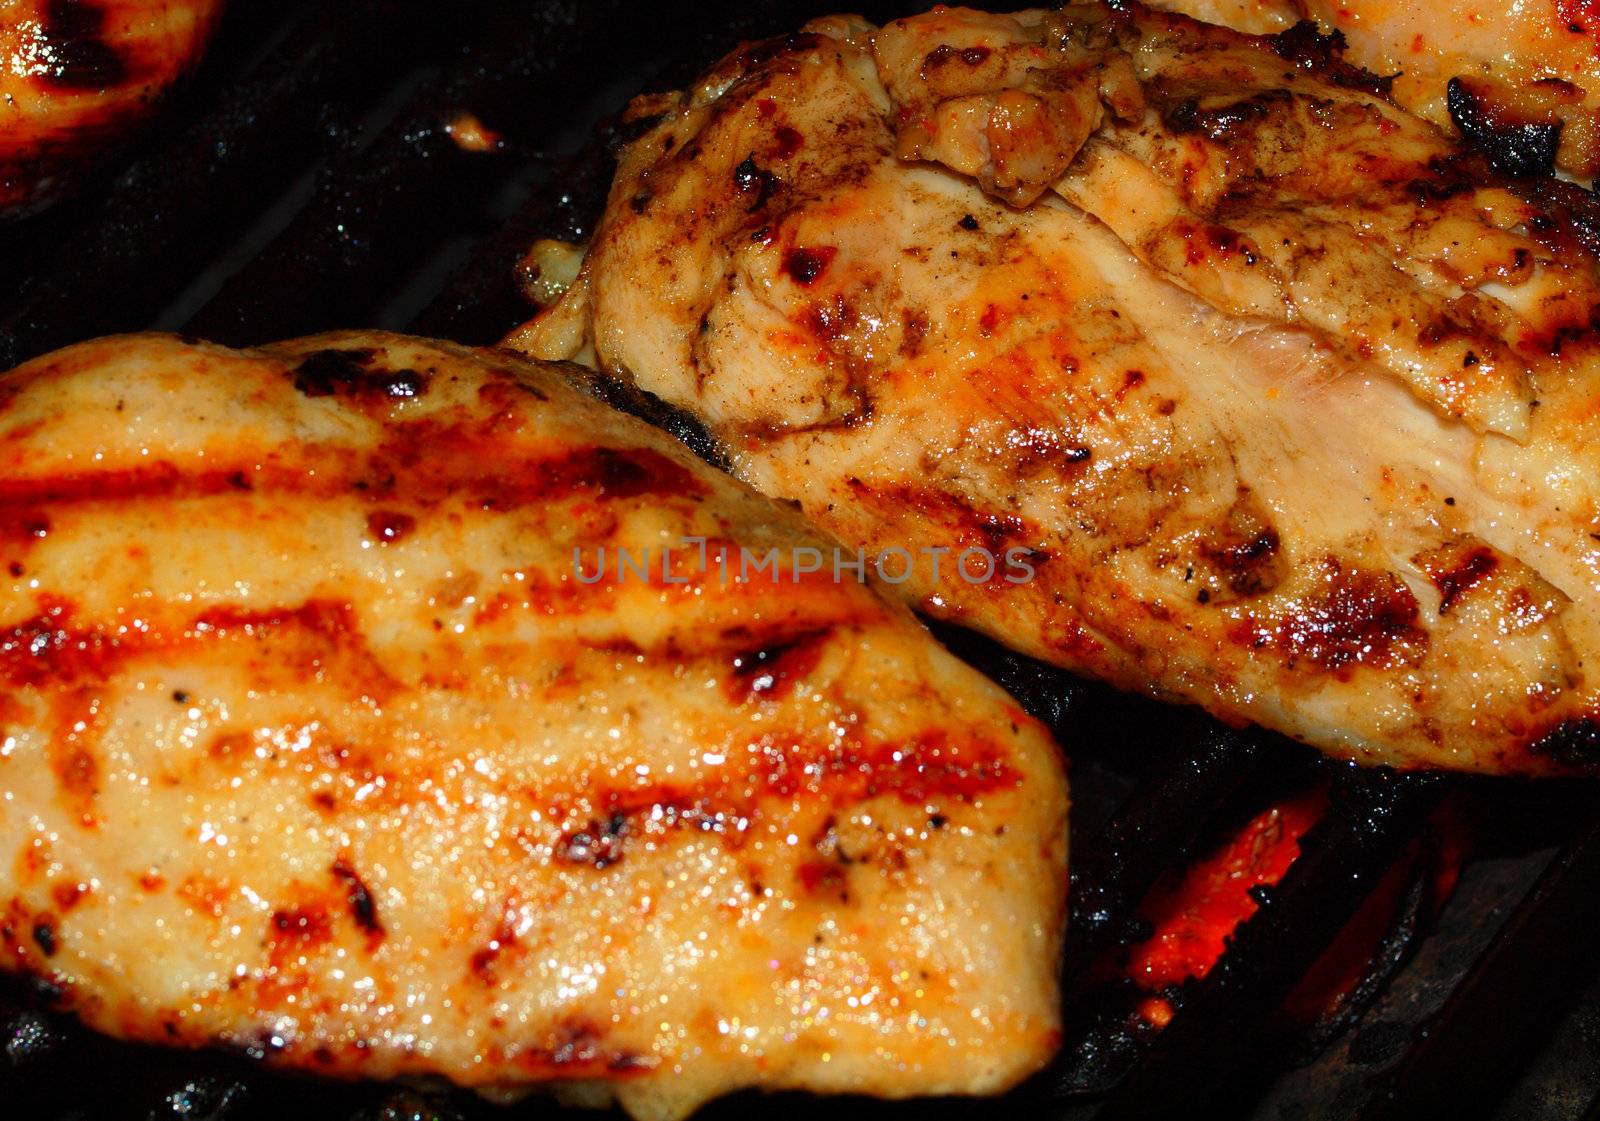 Fresh Grilled Chicken Breasts on the Barbecue by Frankljunior